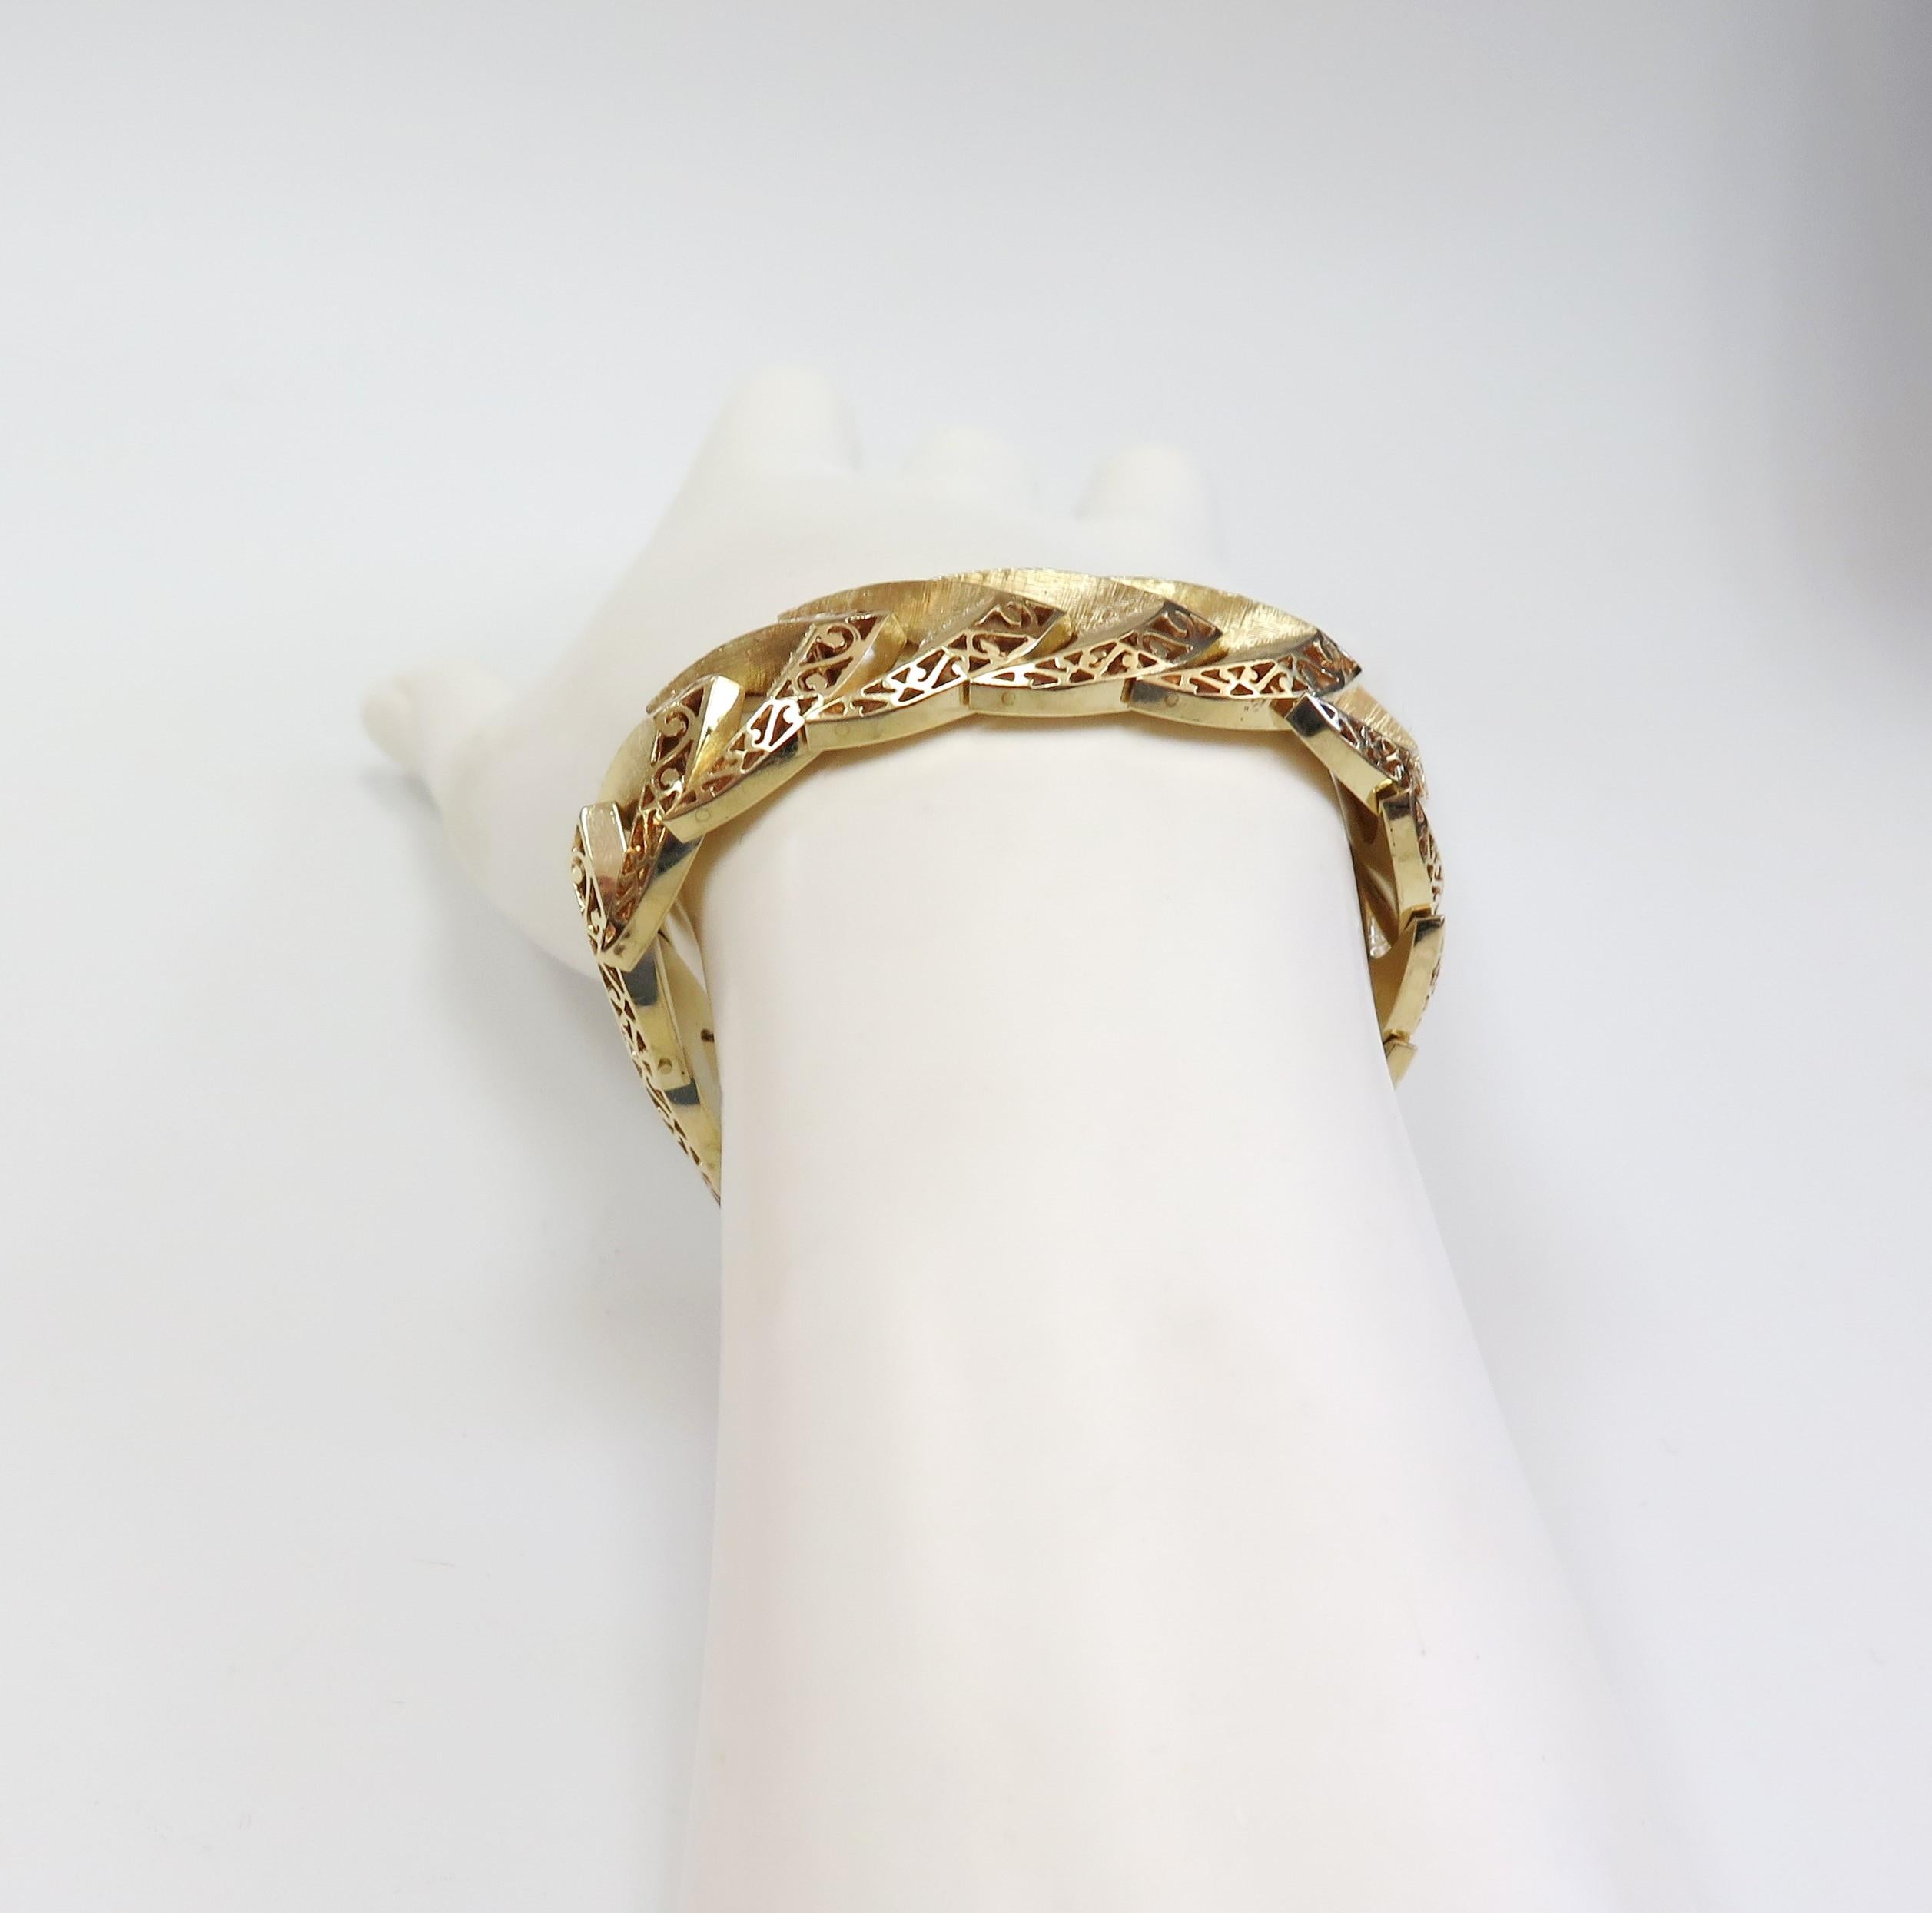 Wide Bracelet with Chevron and Scroll Design, 14 Karat Yellow Gold 8